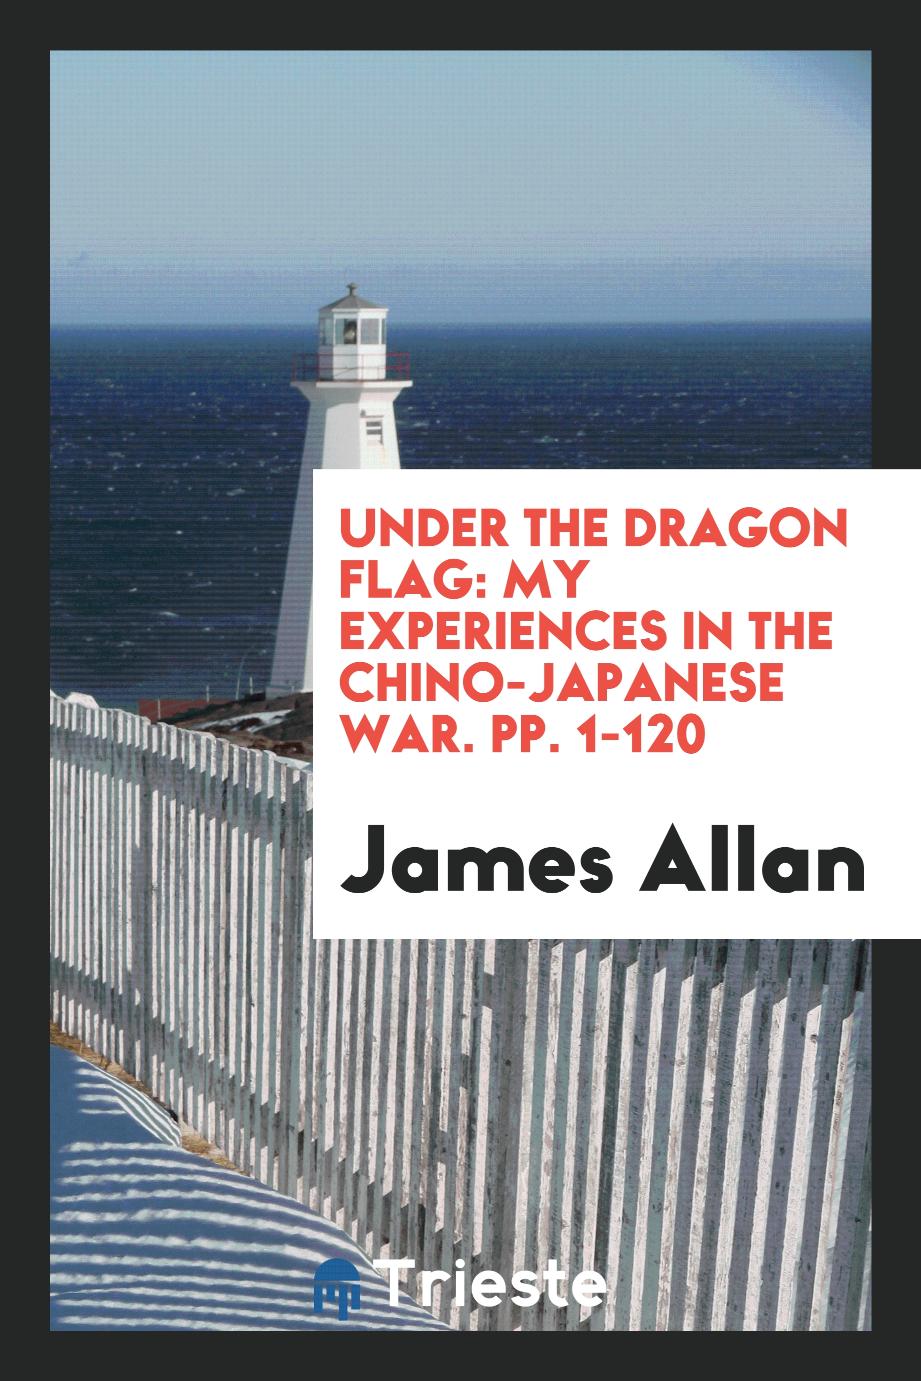 Under the Dragon Flag: My Experiences in the Chino-Japanese War. pp. 1-120